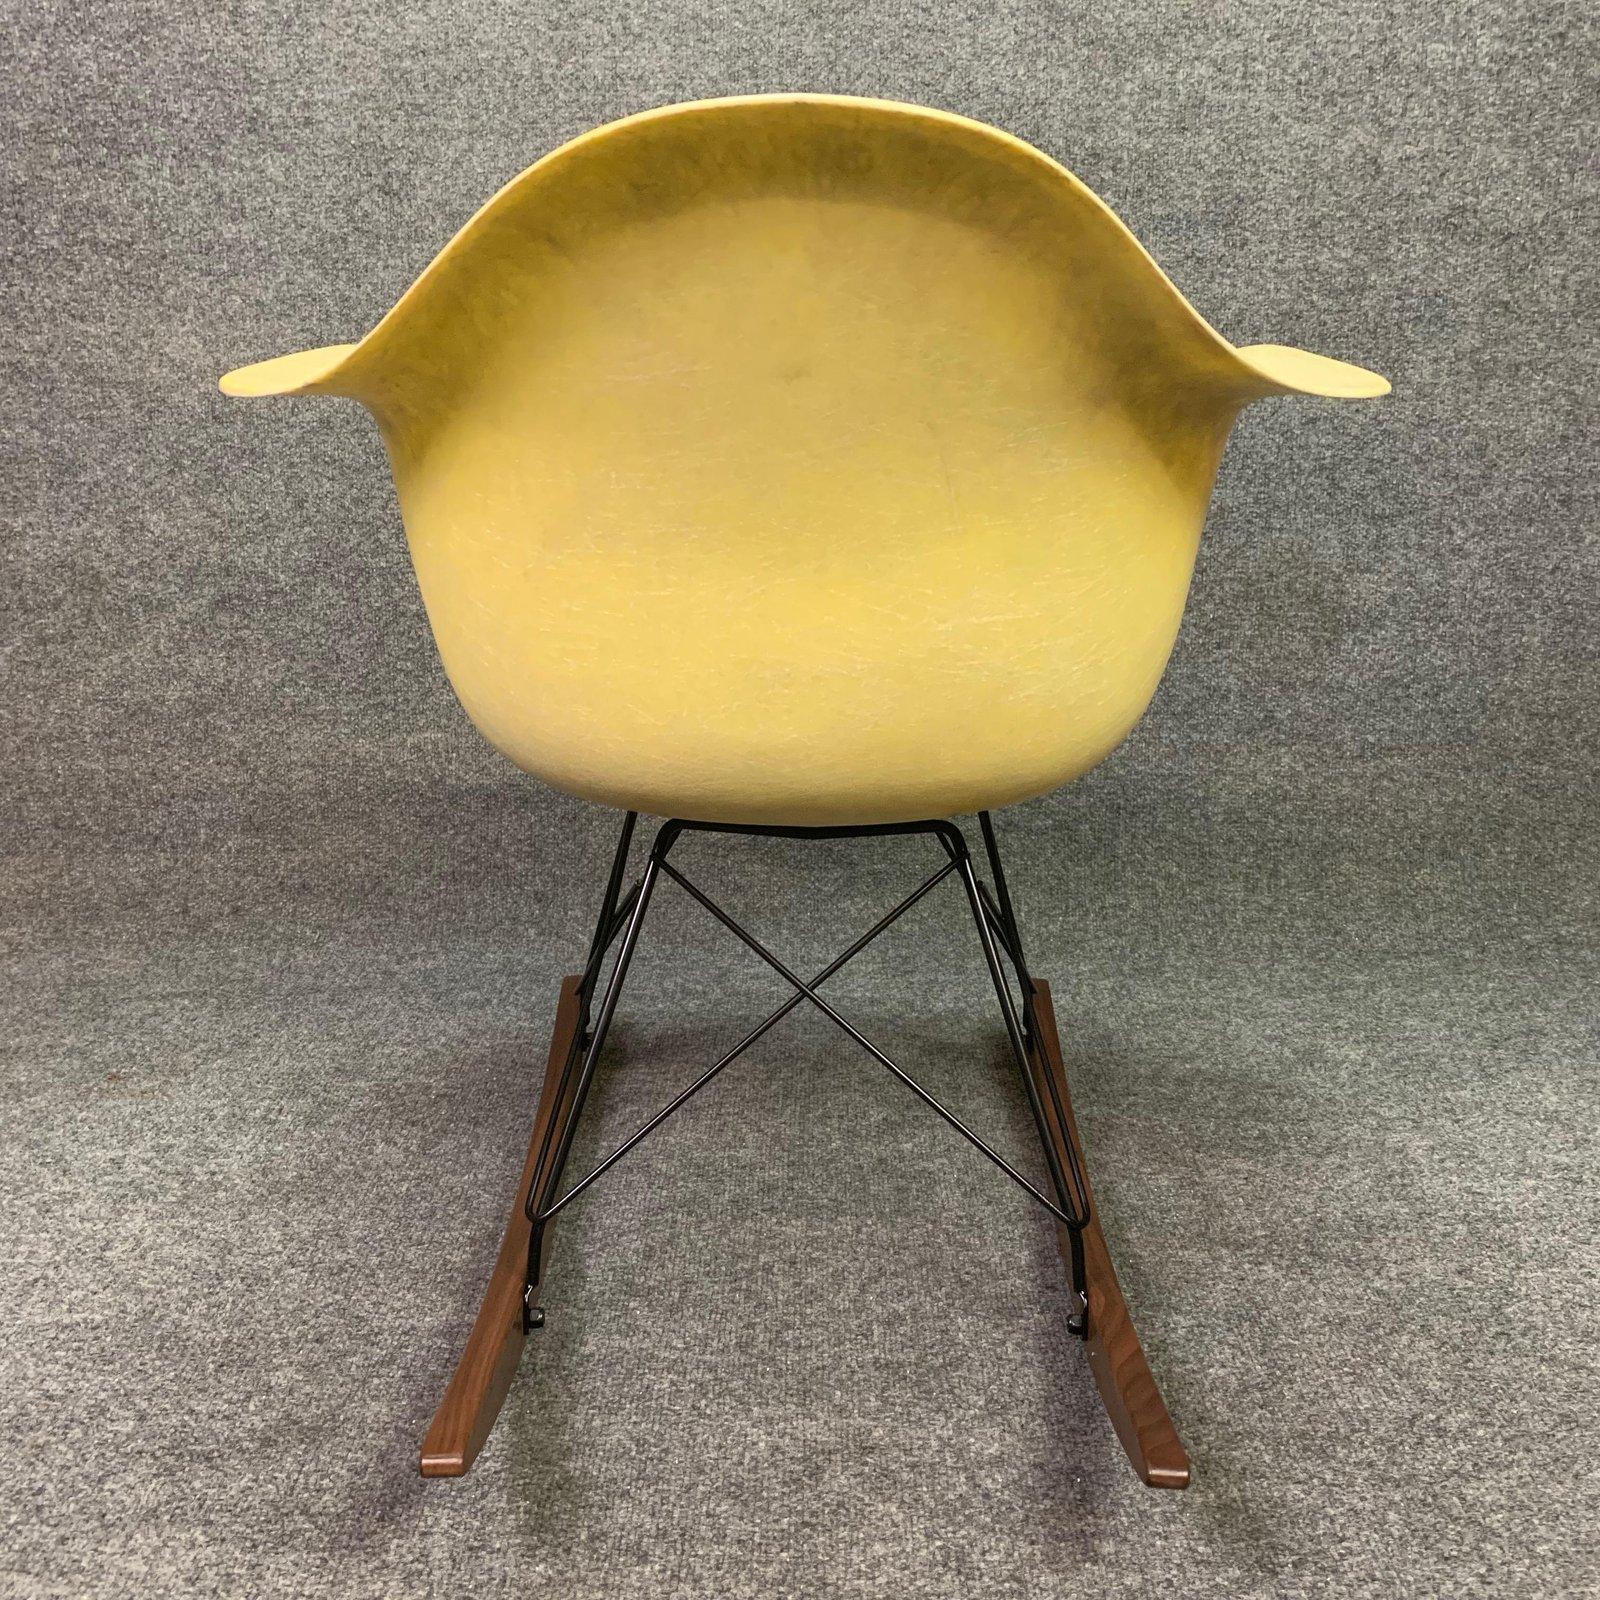 Molded Vintage Mid Century Fiberglass Rocking Chair by Charles Eames